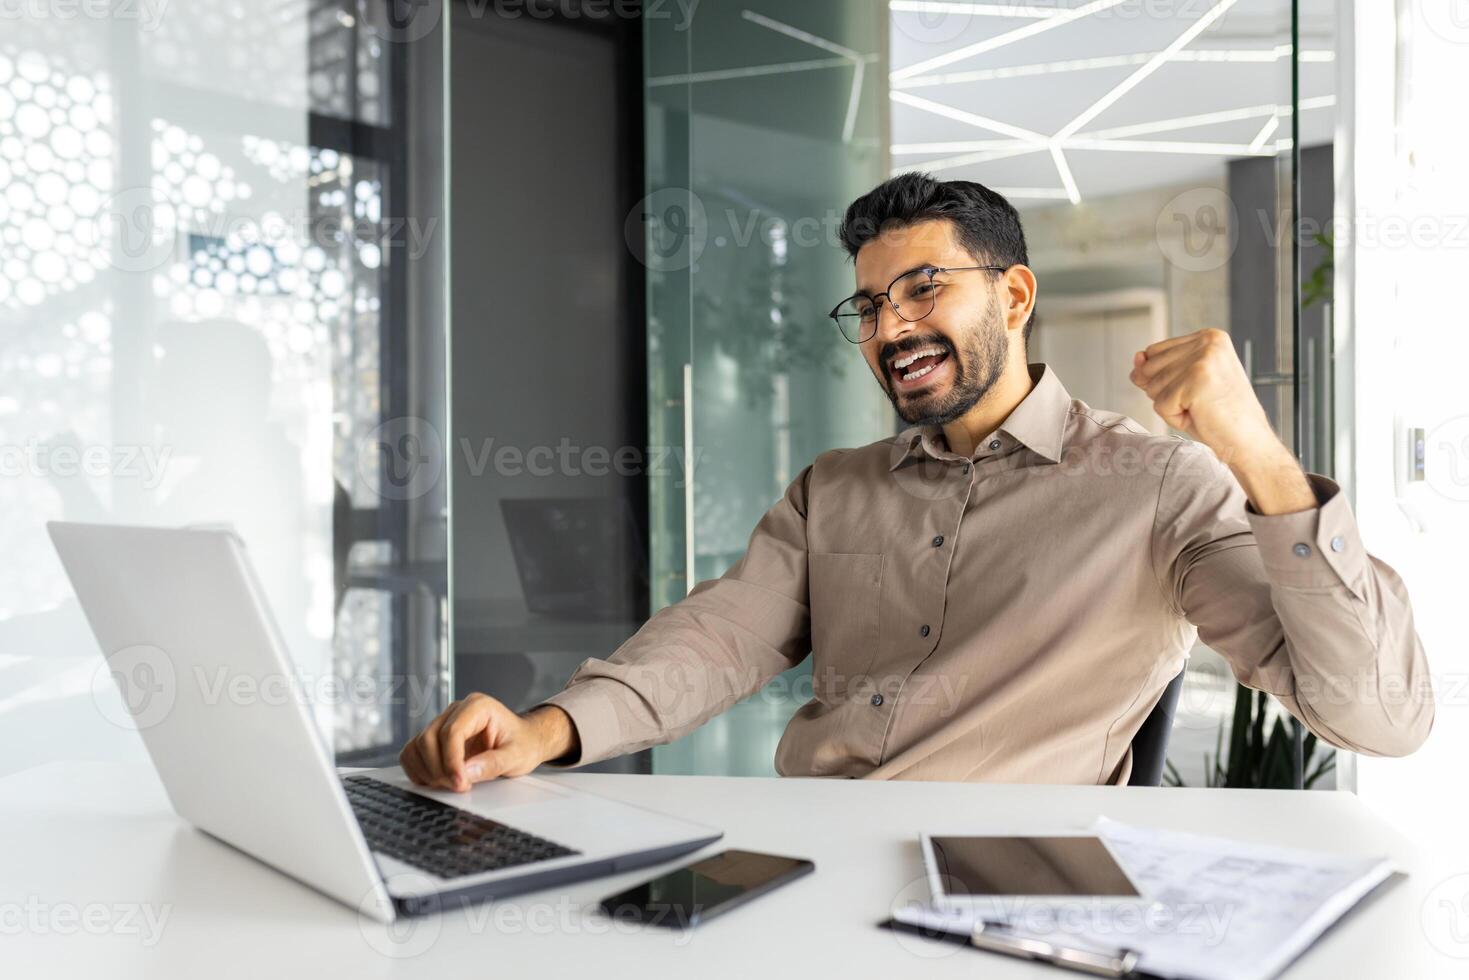 Successful businessman inside office celebrating victory and triumph, man reading happy news from laptop, entrepreneur working at workplace, satisfied with achievement results. photo